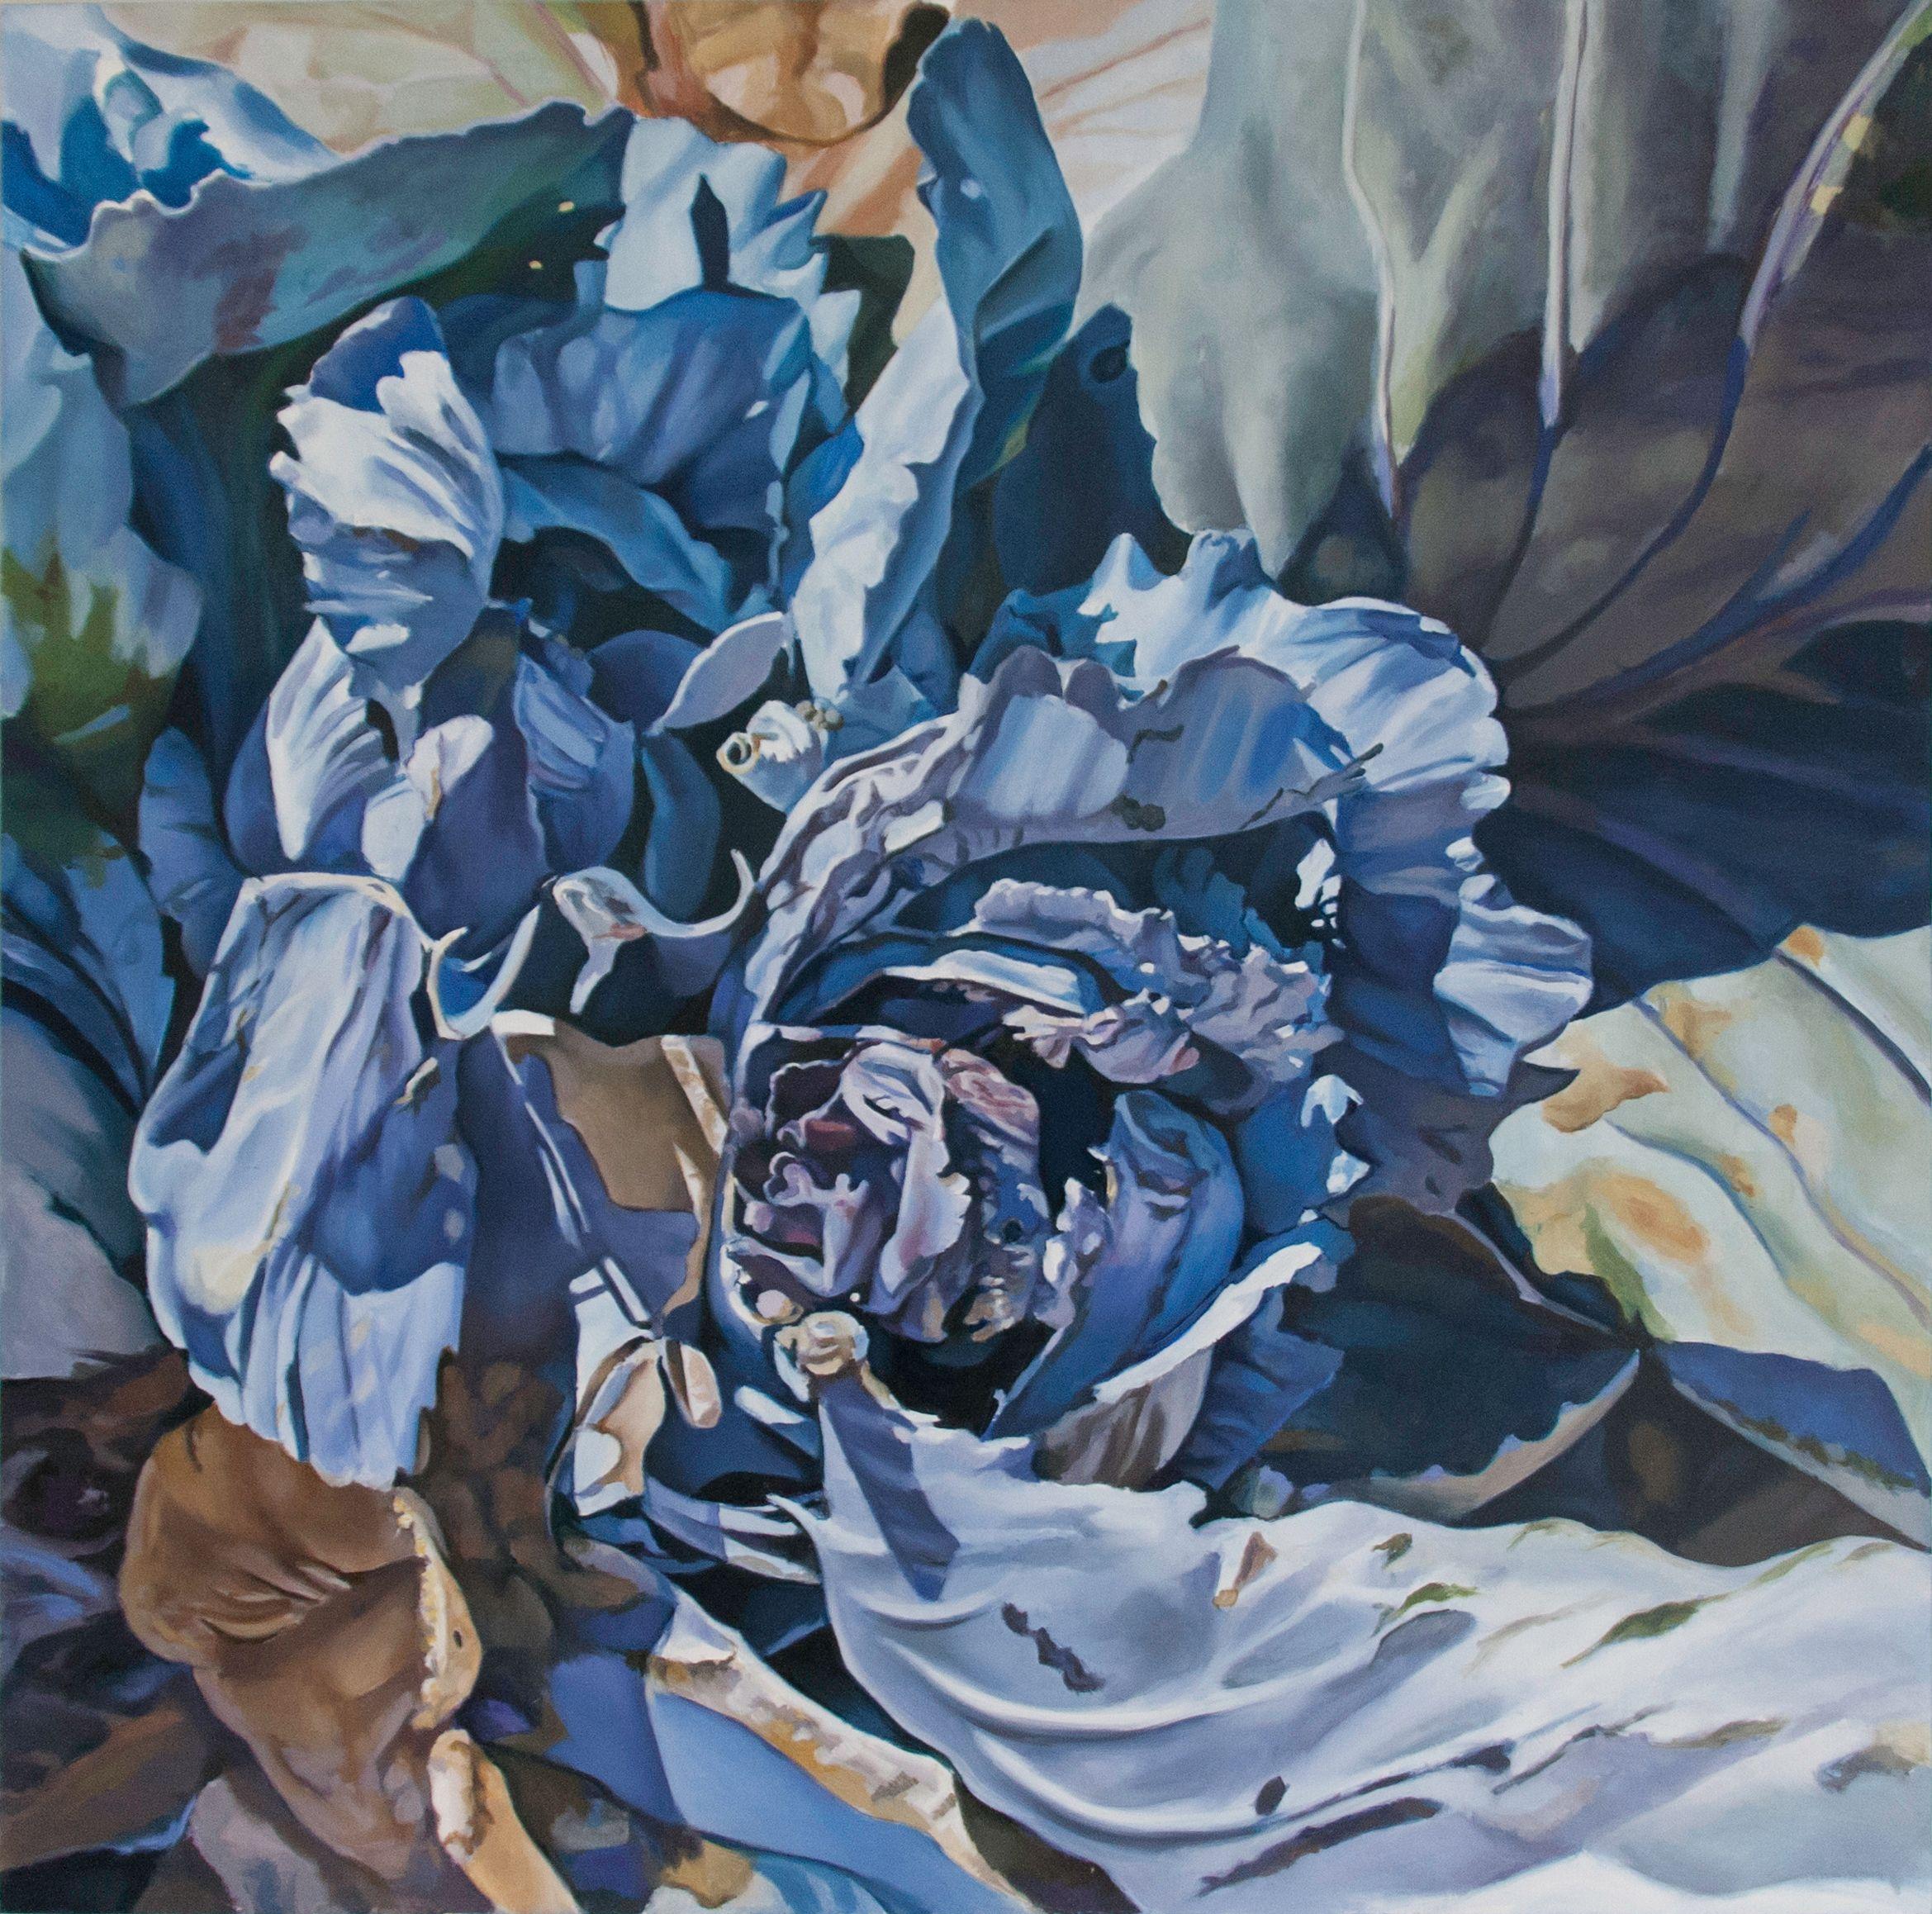 Valencia, the city of Spain where I live, is surrounded by orchards. While taking a walk I saw this shinny blue something, which happened to be a cabbage. Nature is so delightful, when you take a moment to look at it... :: Painting :: Realism ::